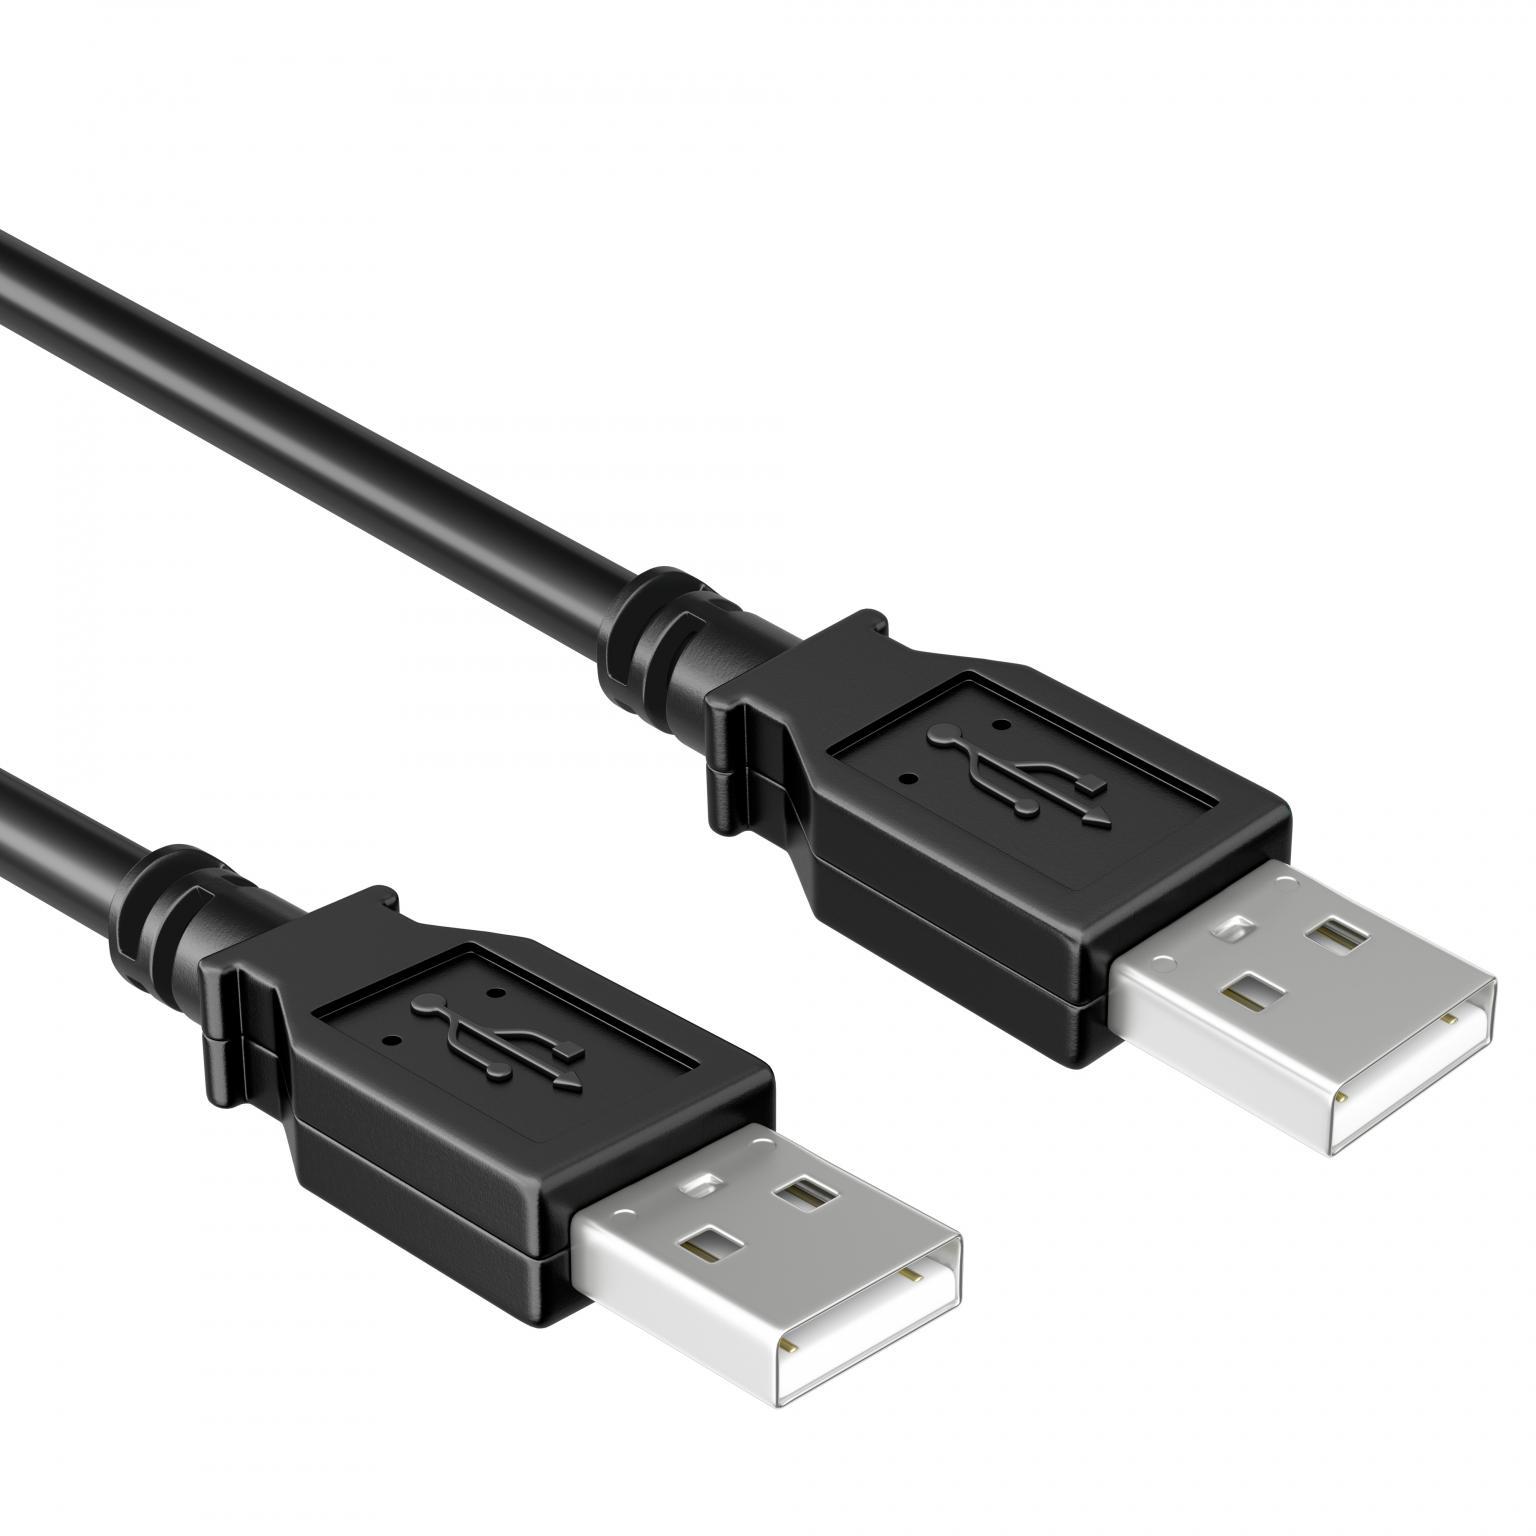 USB 2.0 cable, Typ - Digitus